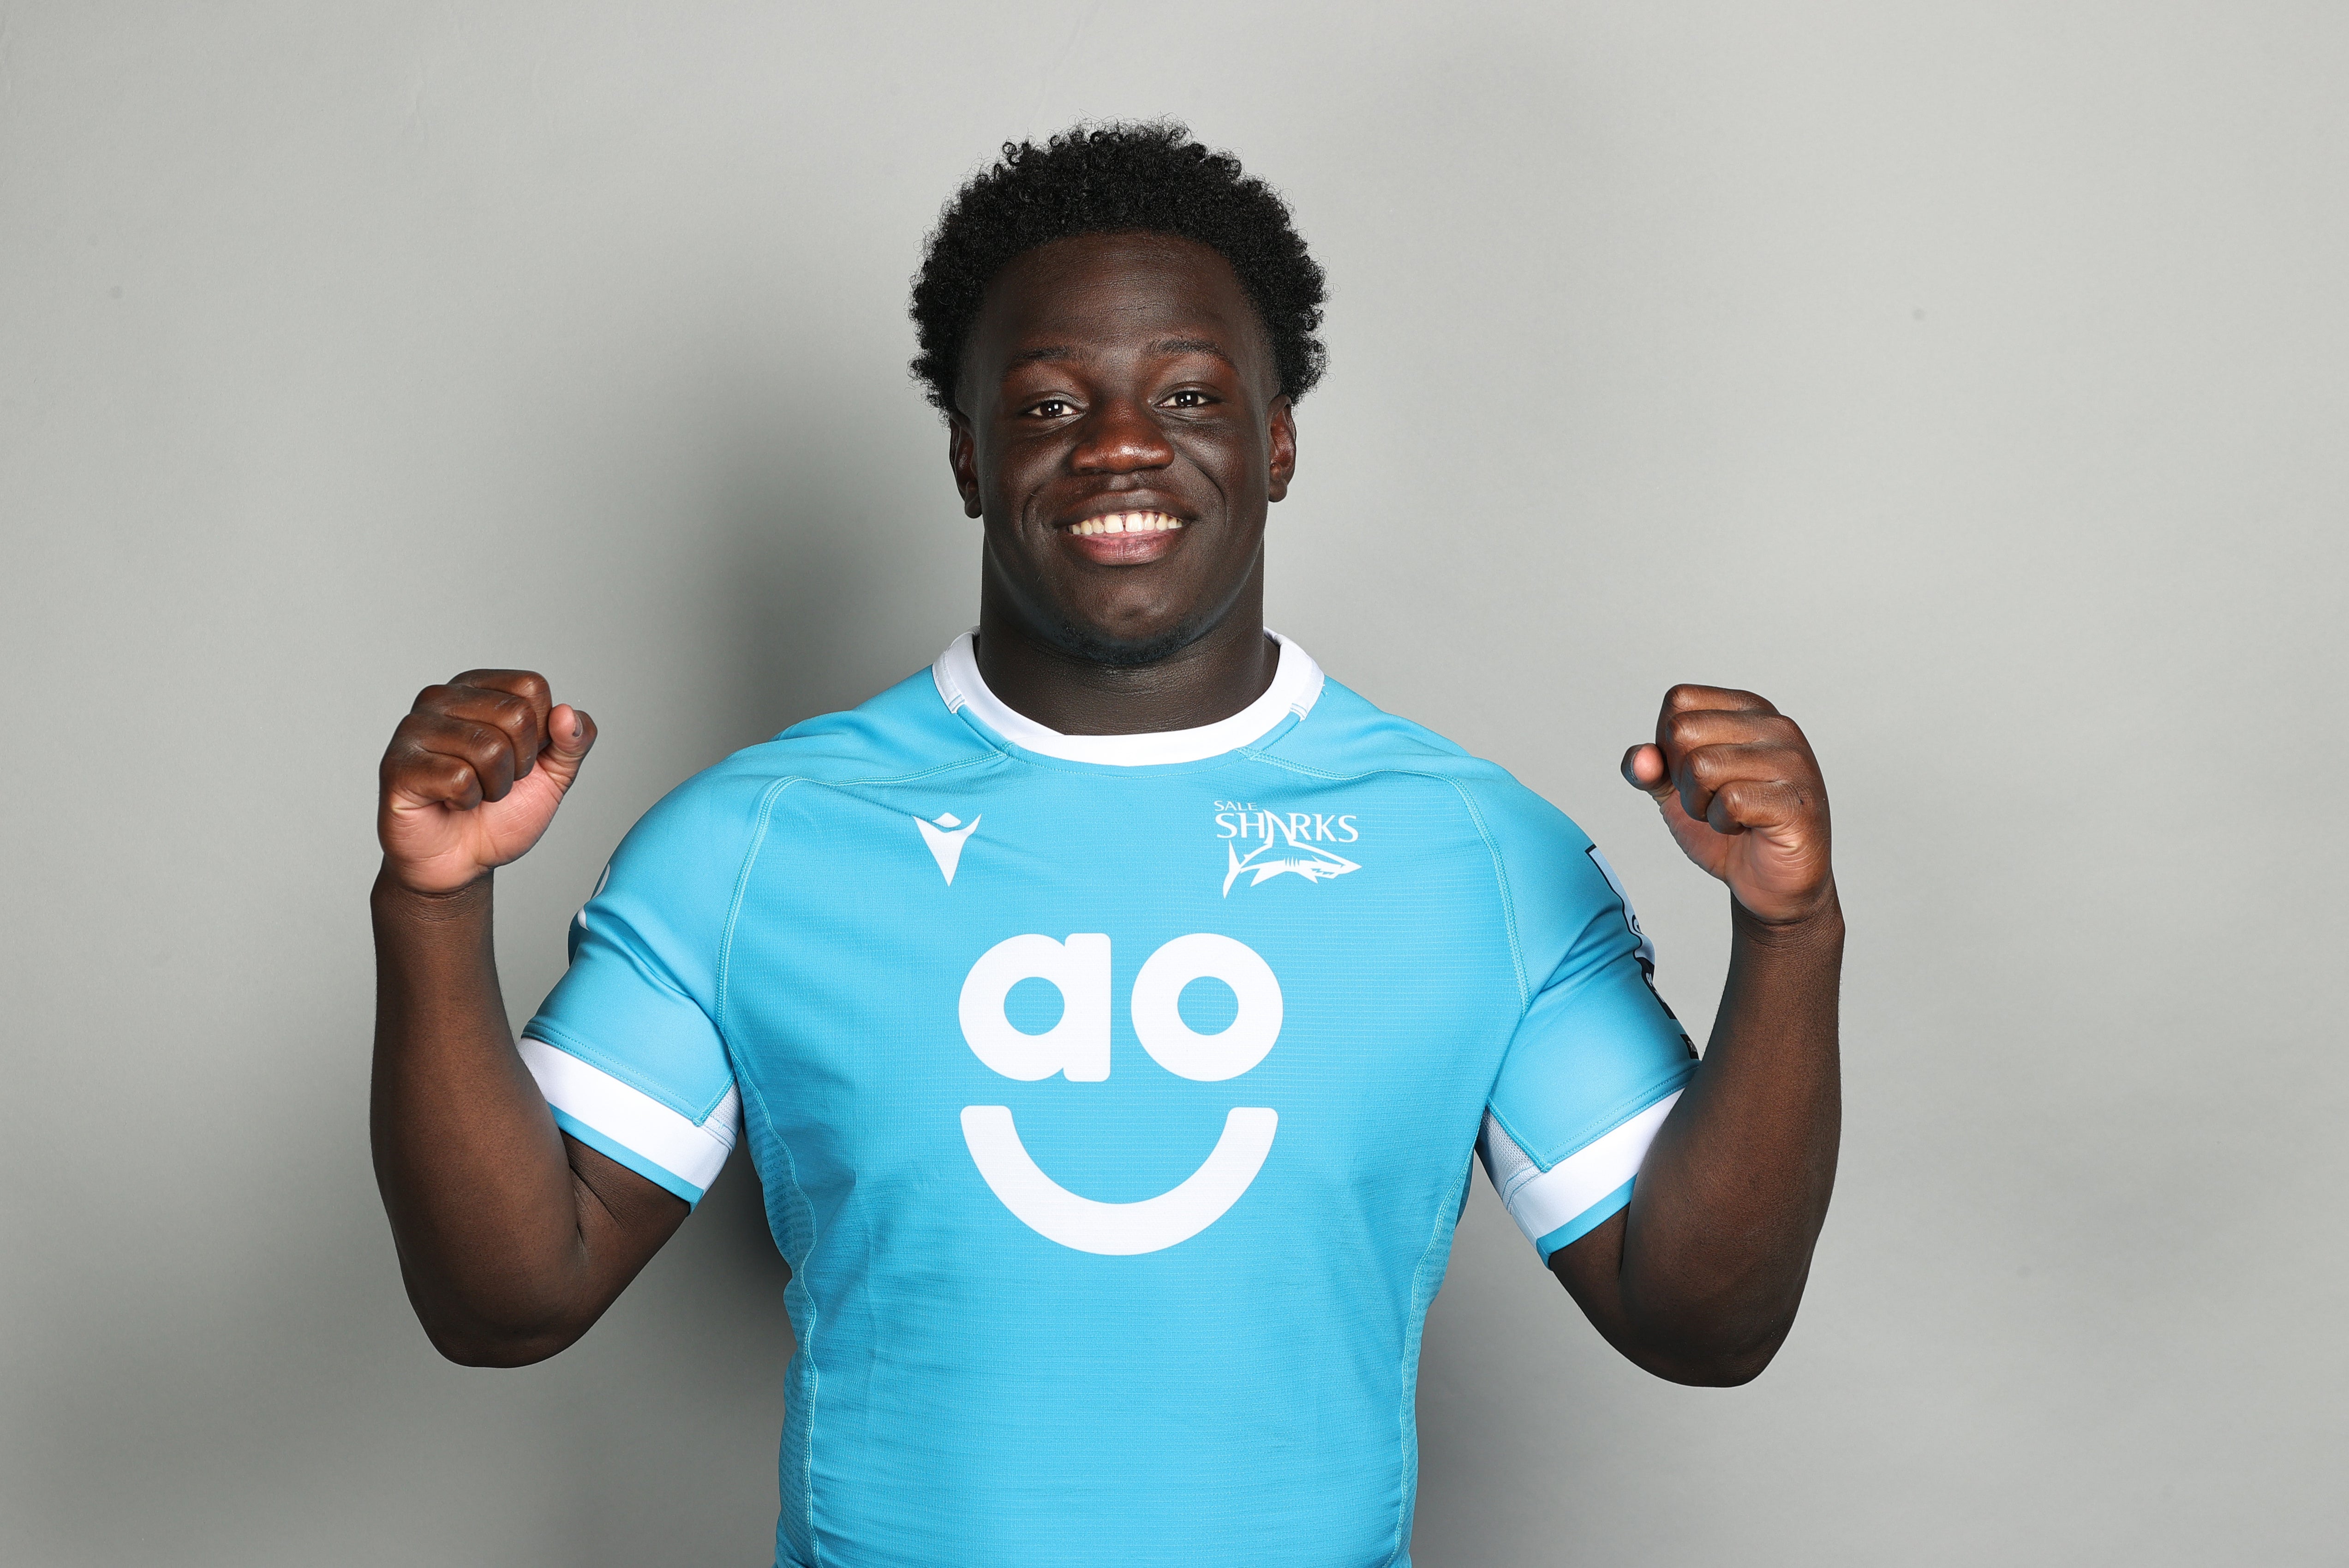 Asher Opoku-Fordjour is a rising star of English rugby